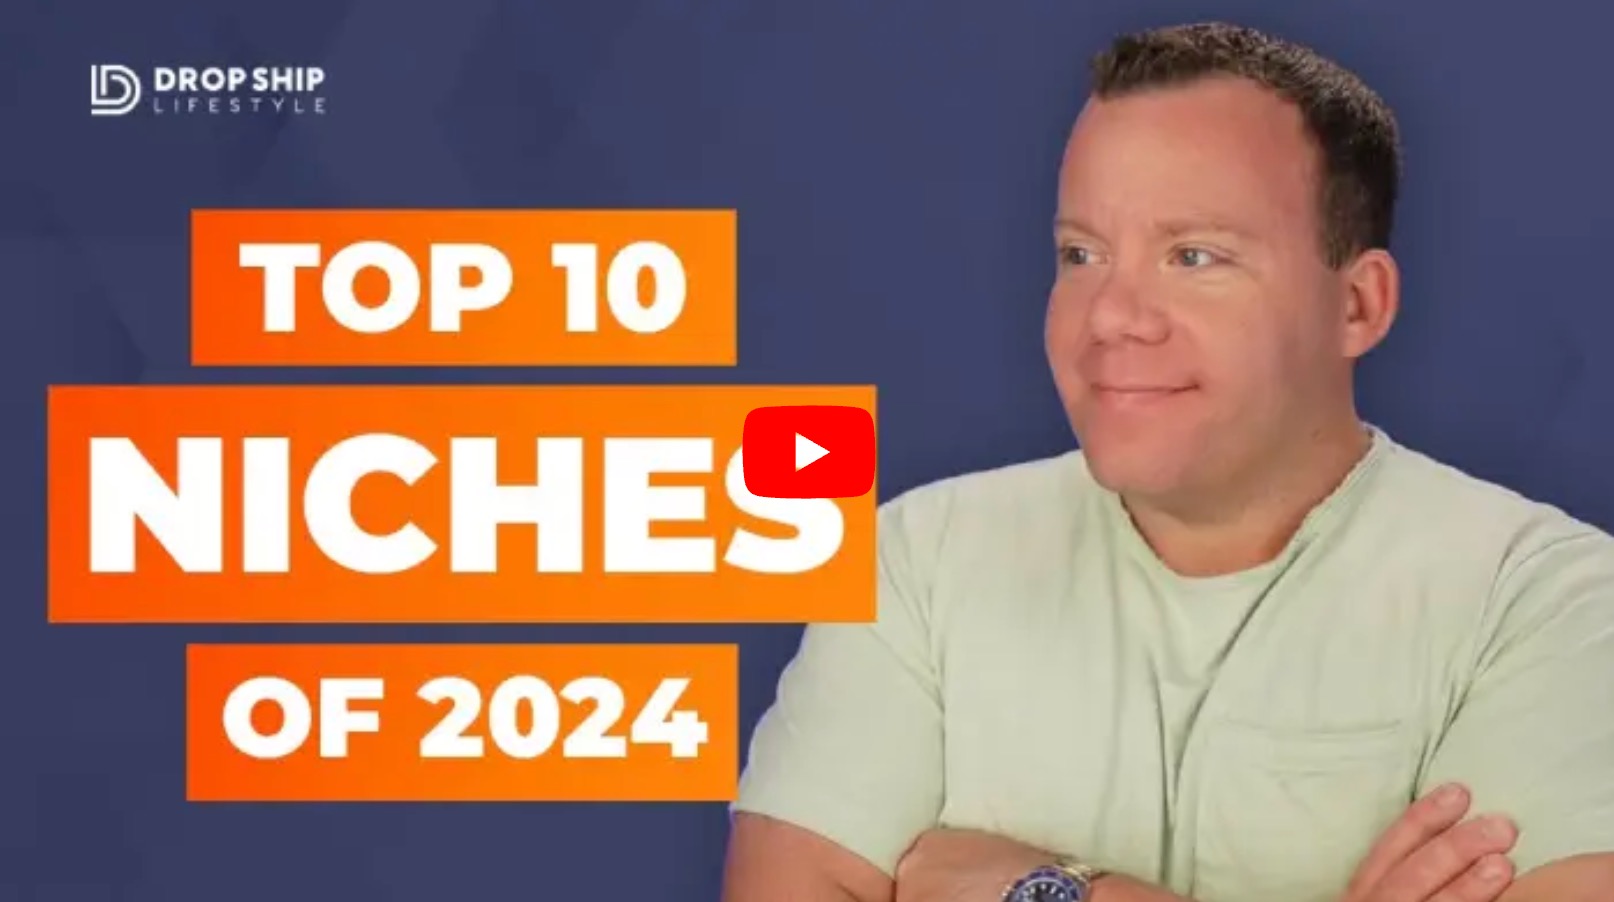 Top 10 Niches of 2024